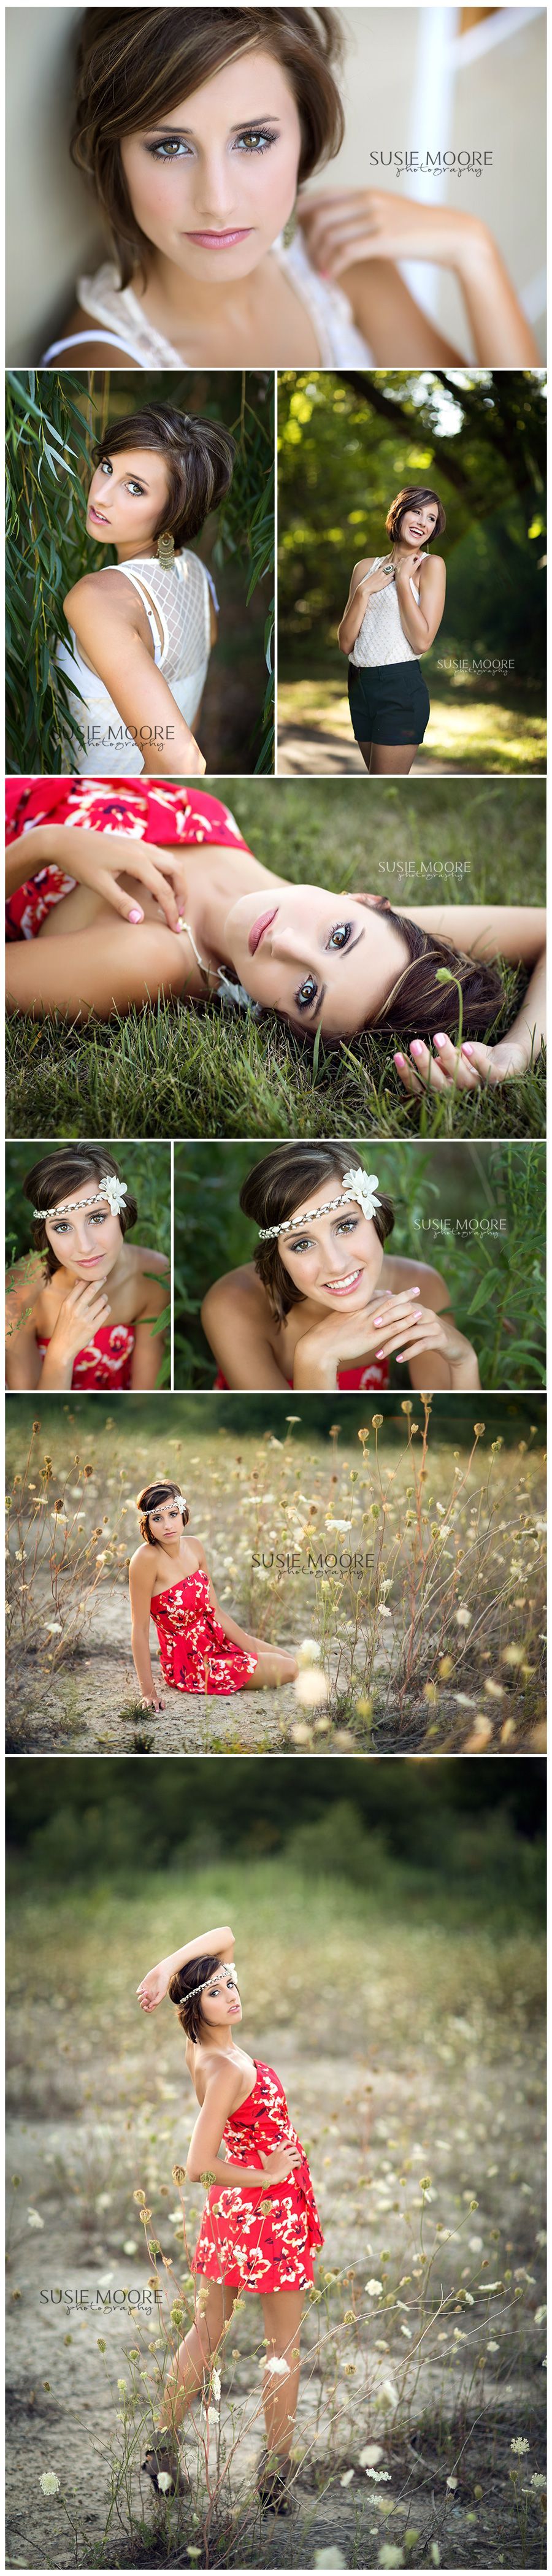 Kaylie | Chicago Senior Photography | Susie Moore Photography. Nice posing ideas in this strip of portraits.